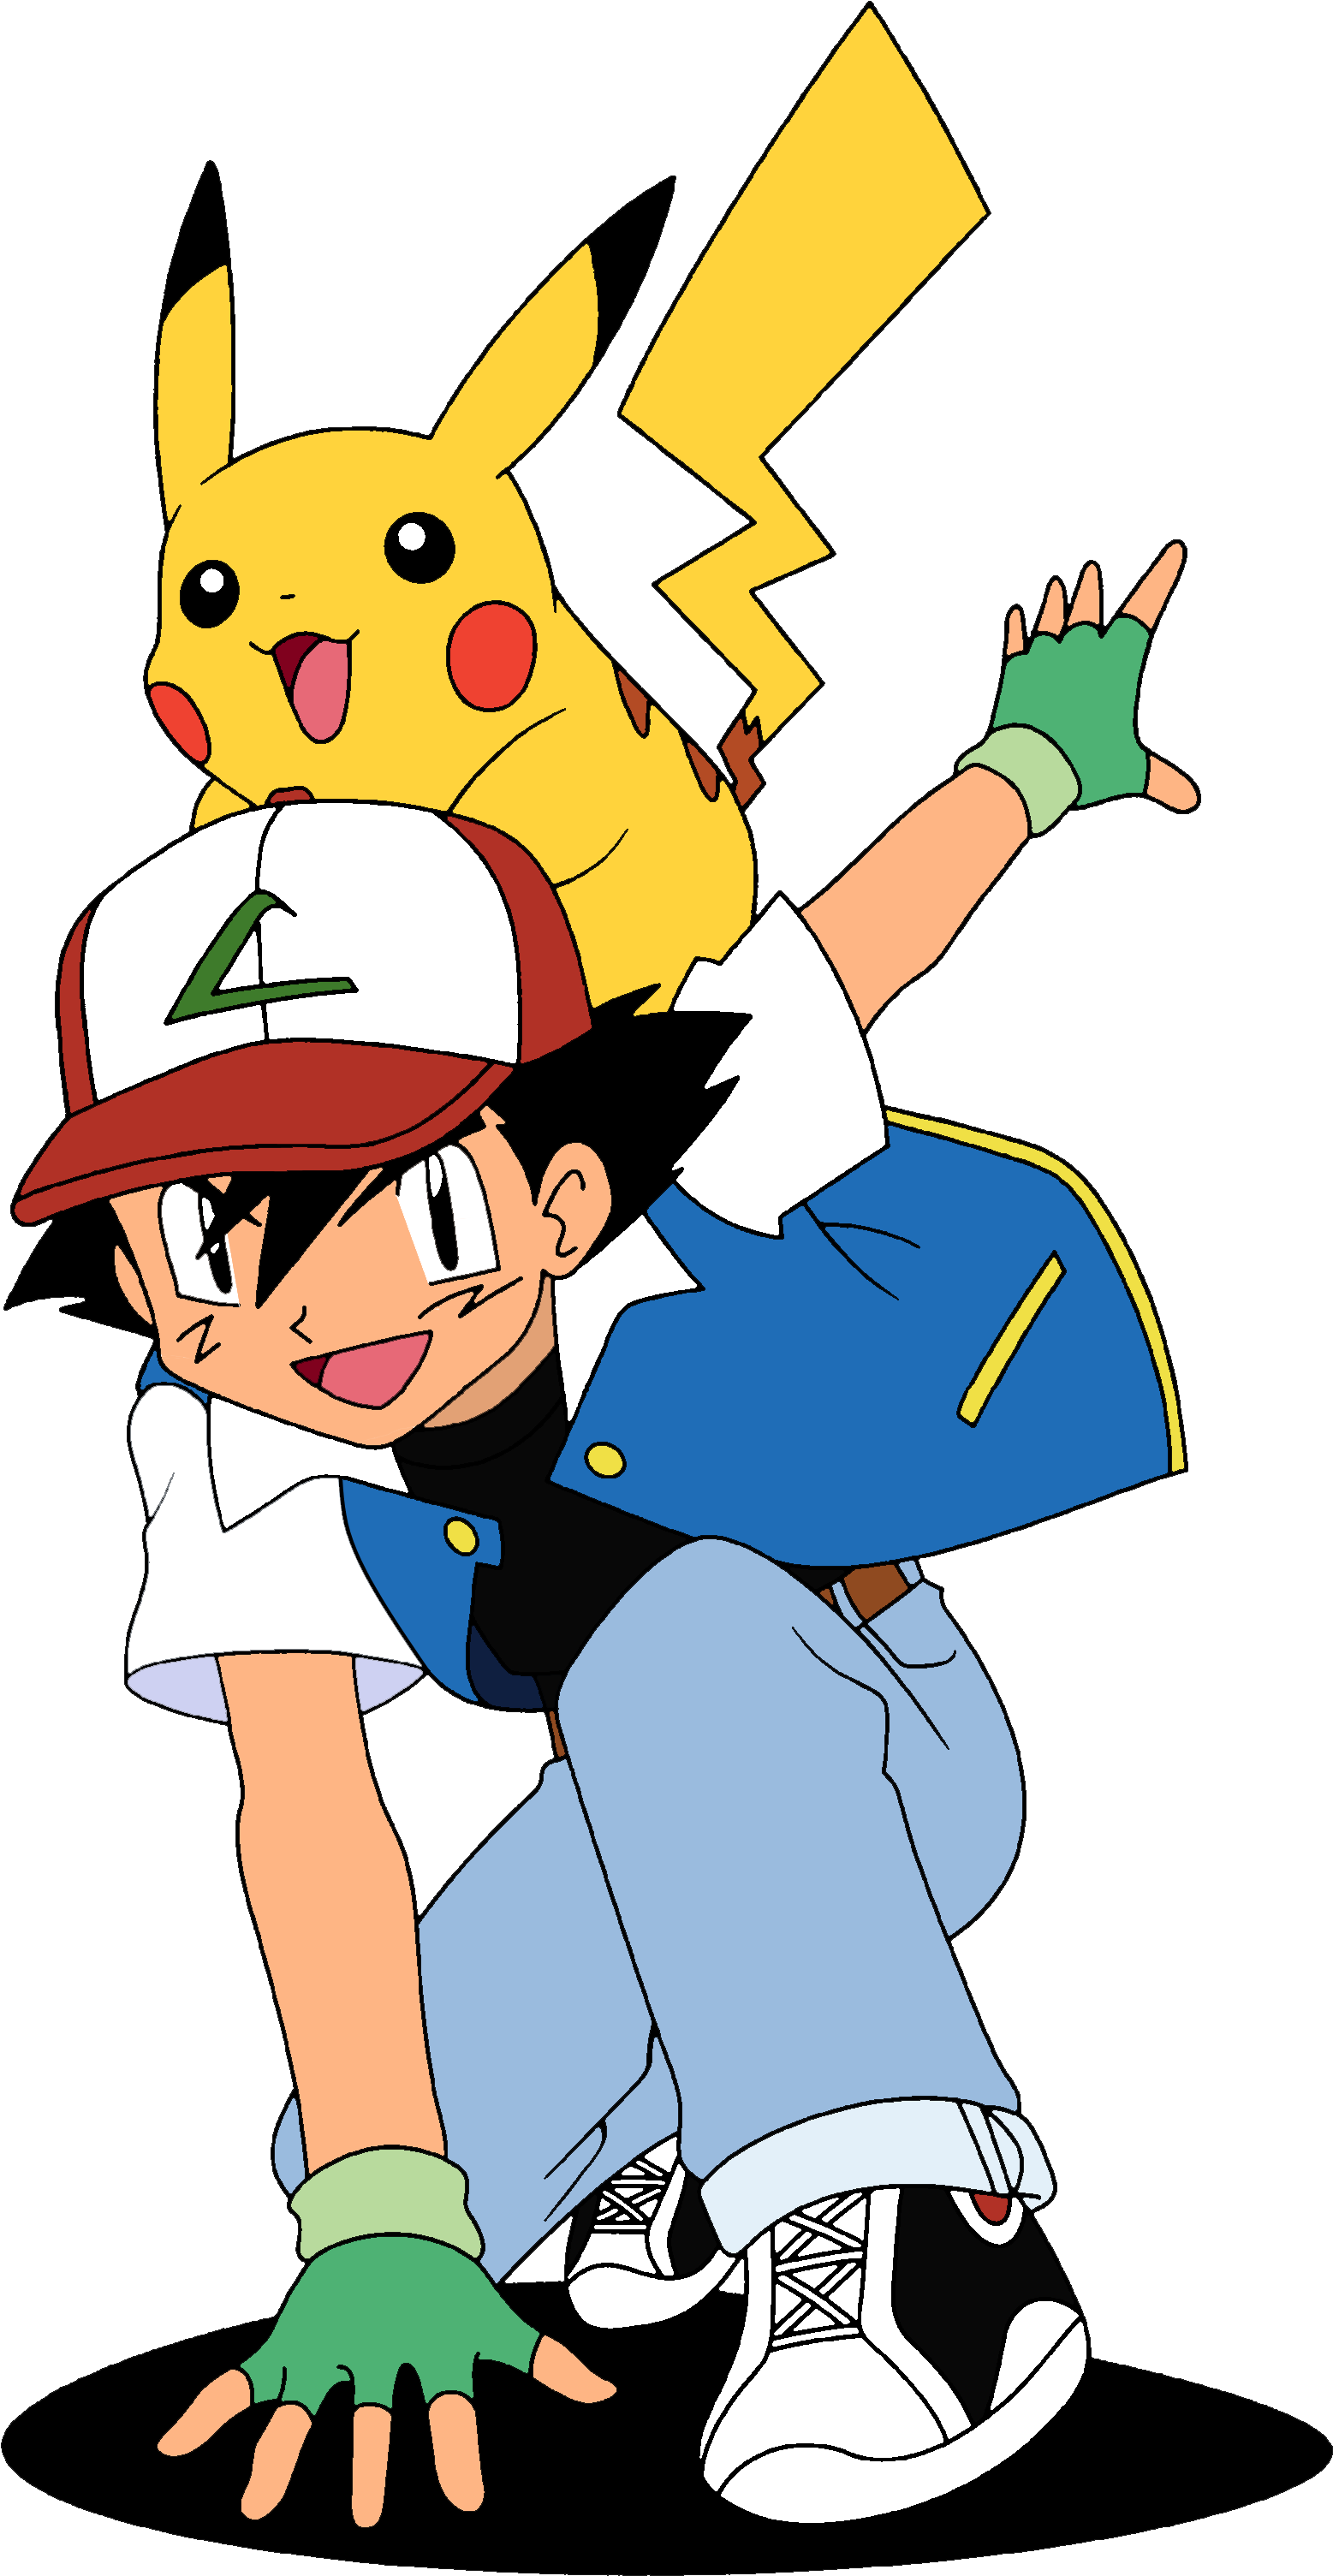 End of an era: Pokémon retires Ash and his Pikachu after 25 years |  VentureBeat